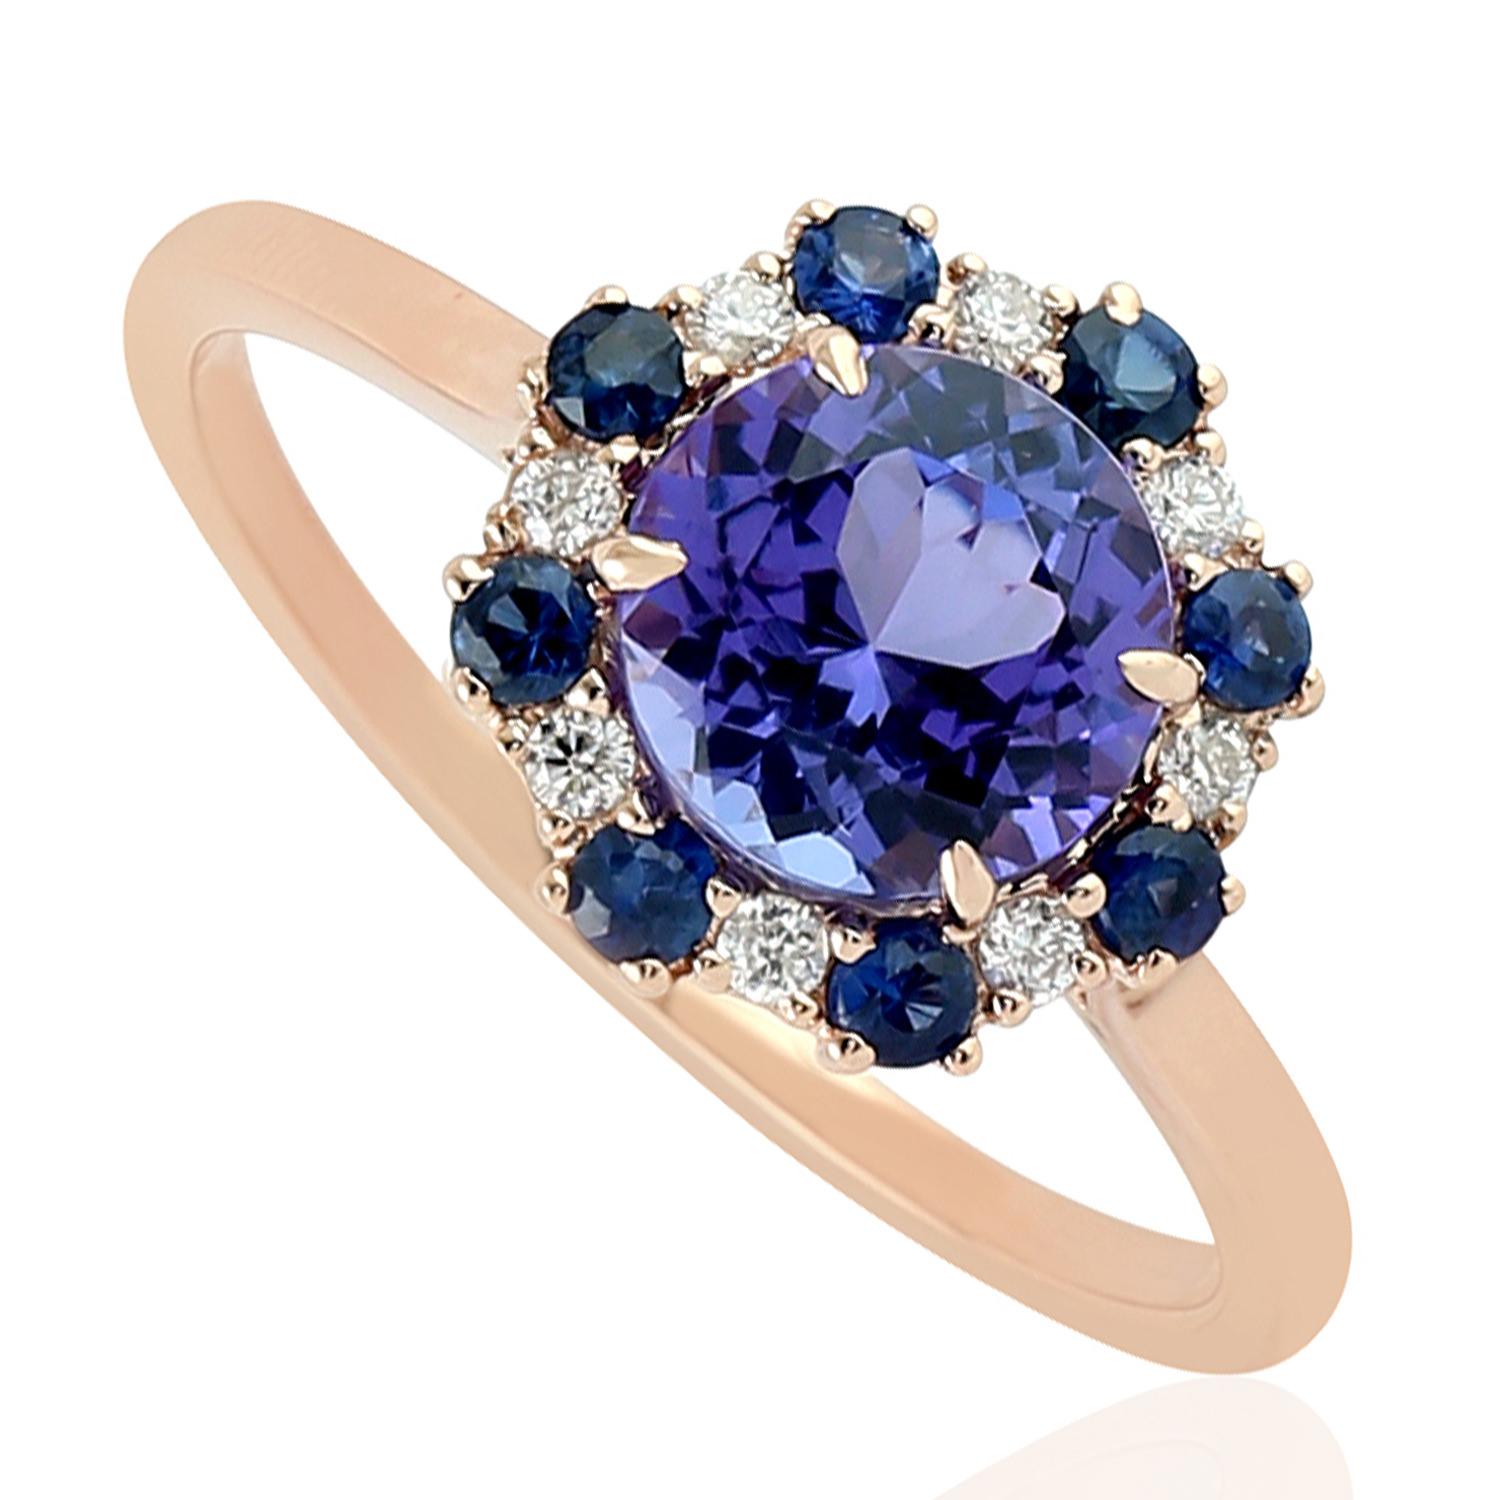 Women's Tanzanite Cocktail Ring With Blue Sapphire & Diamonds Made In 18k Rose Gold For Sale